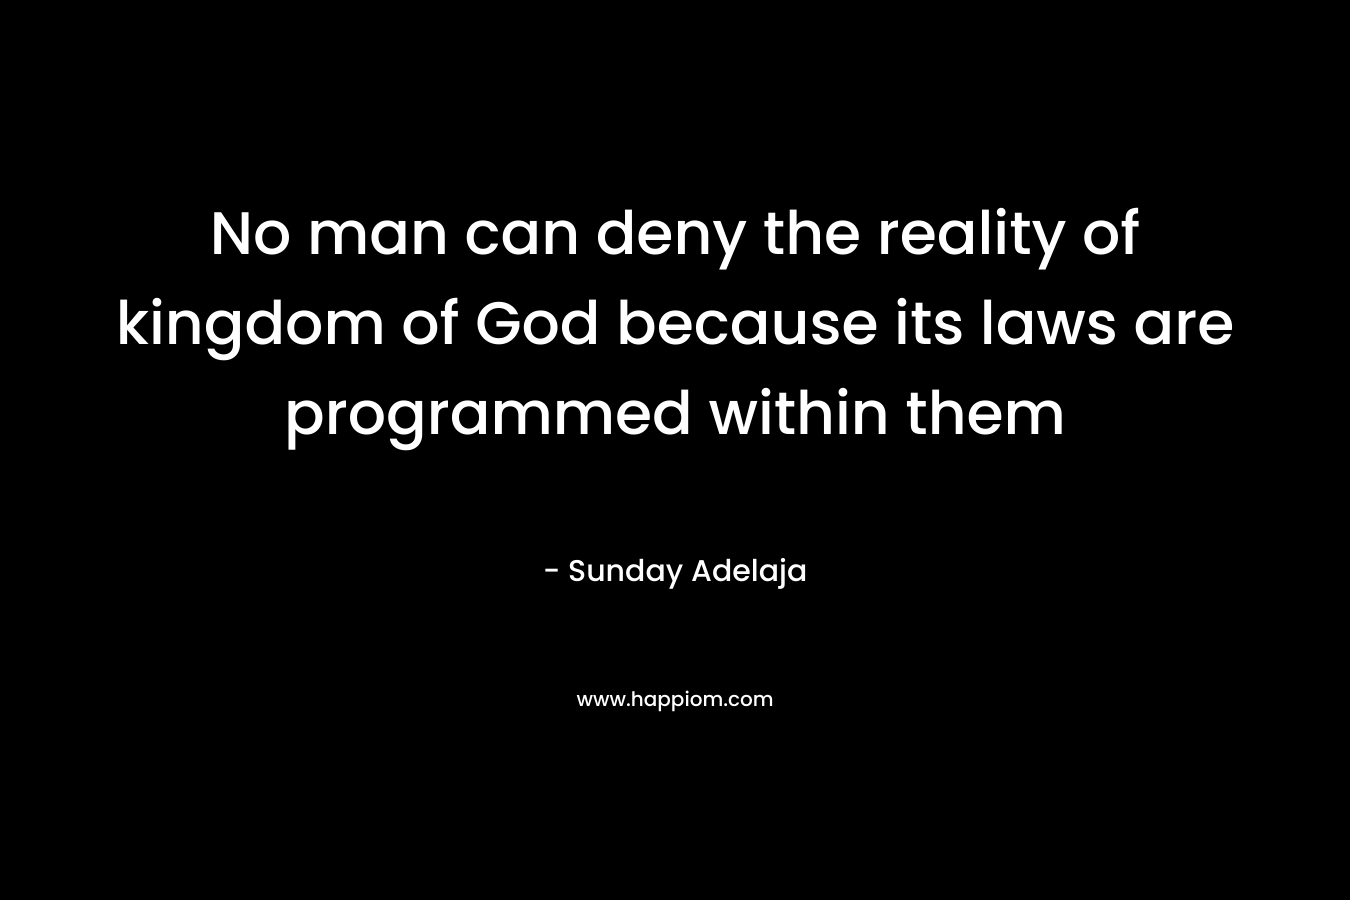 No man can deny the reality of kingdom of God because its laws are programmed within them – Sunday Adelaja